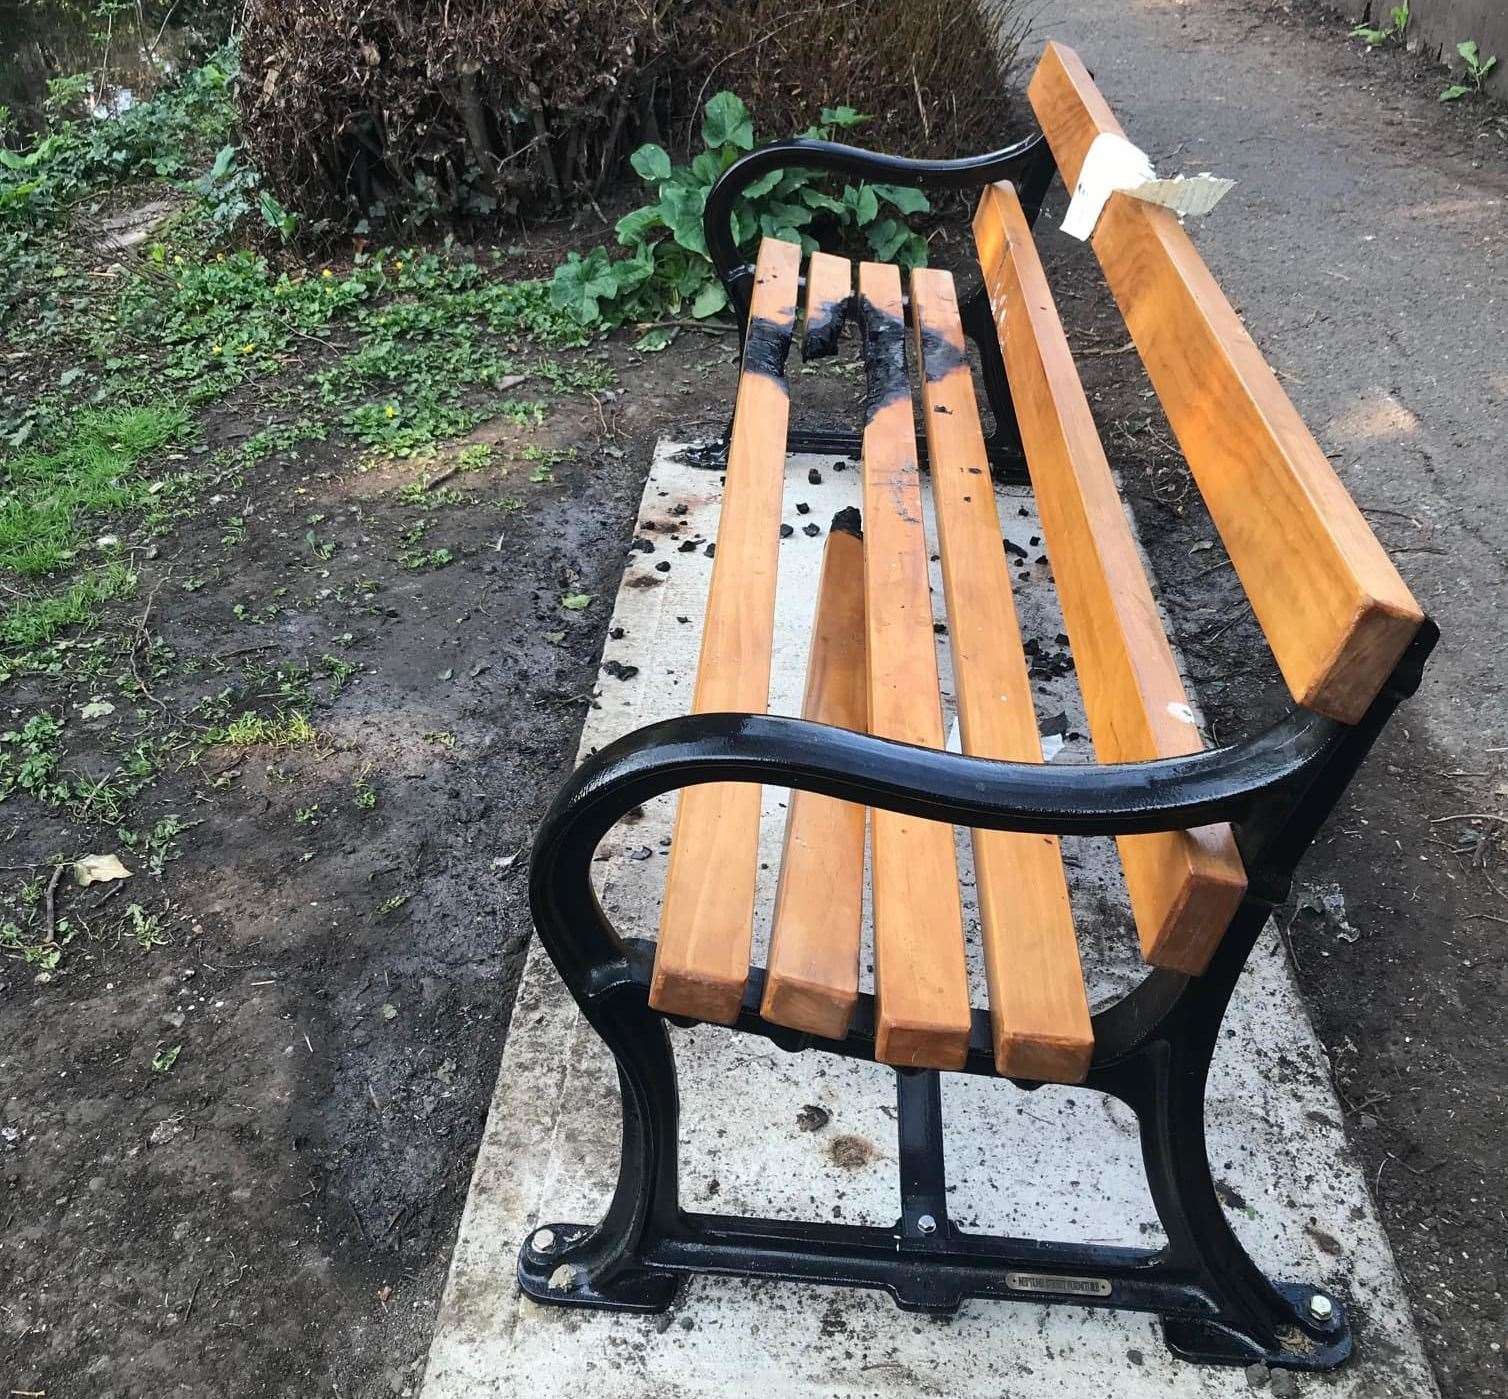 The vandalised bench. Picture: Faversham Town Council